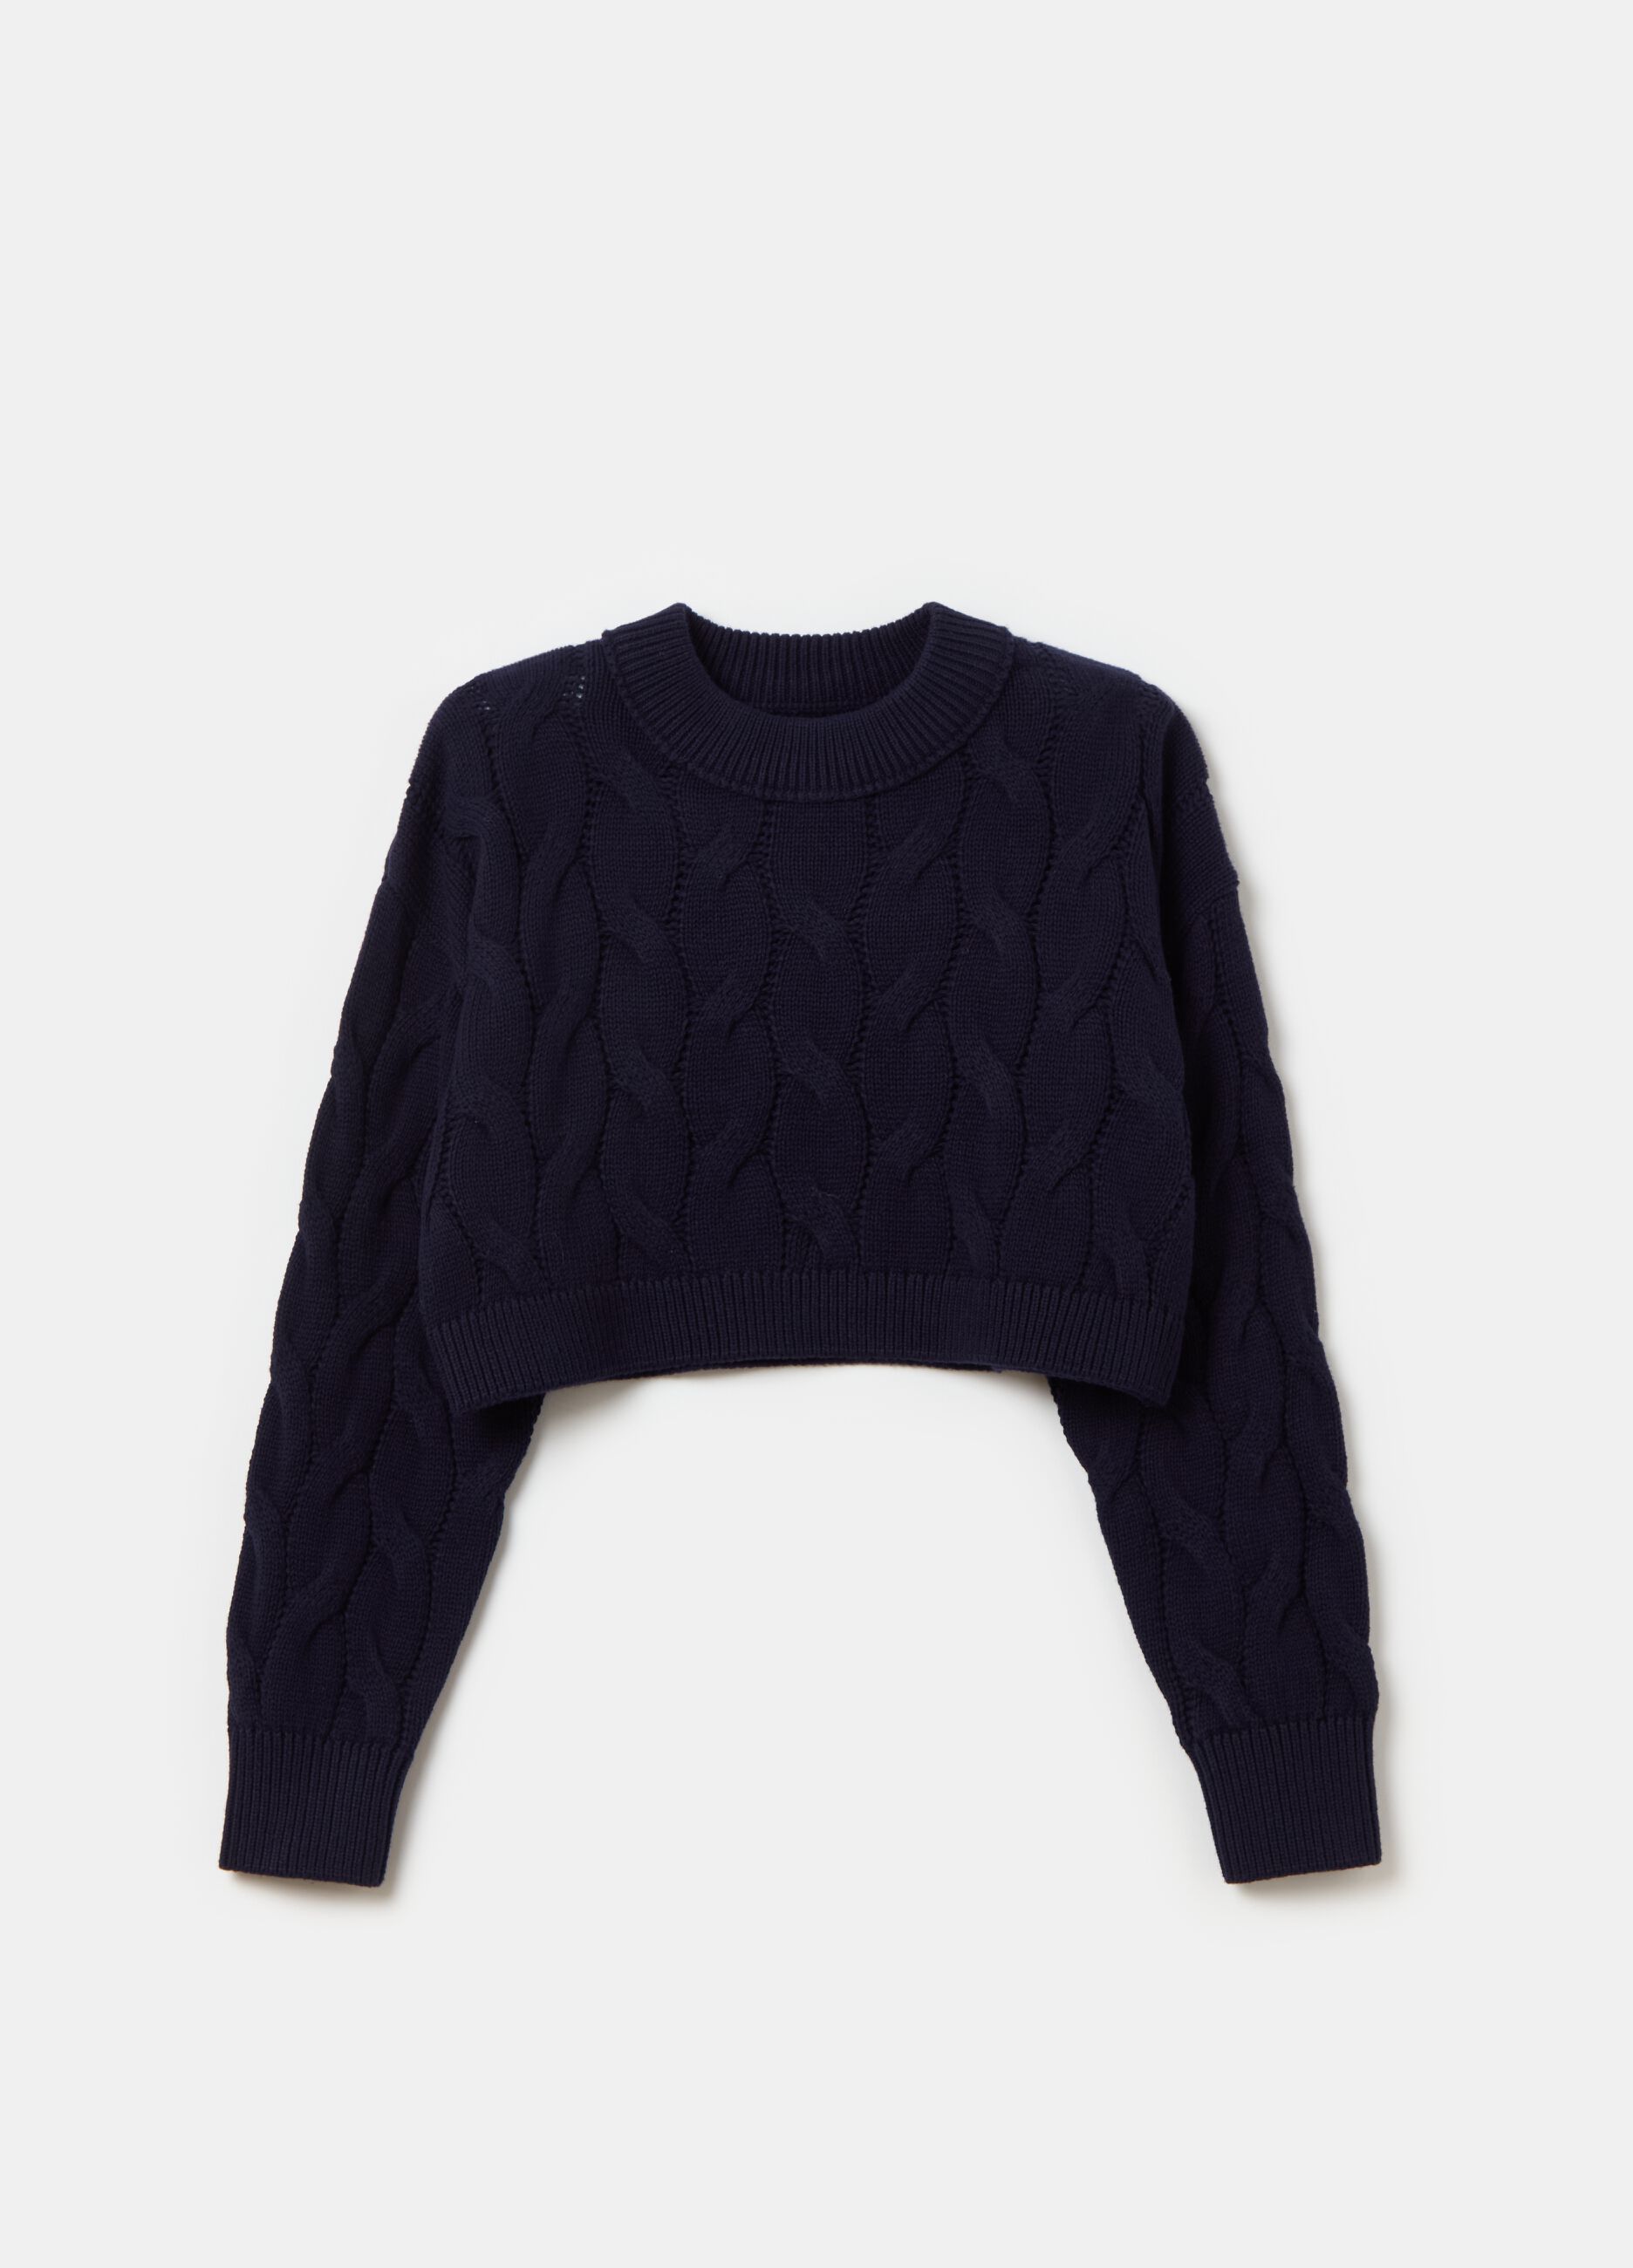 Cropped pullover with cable-knit design